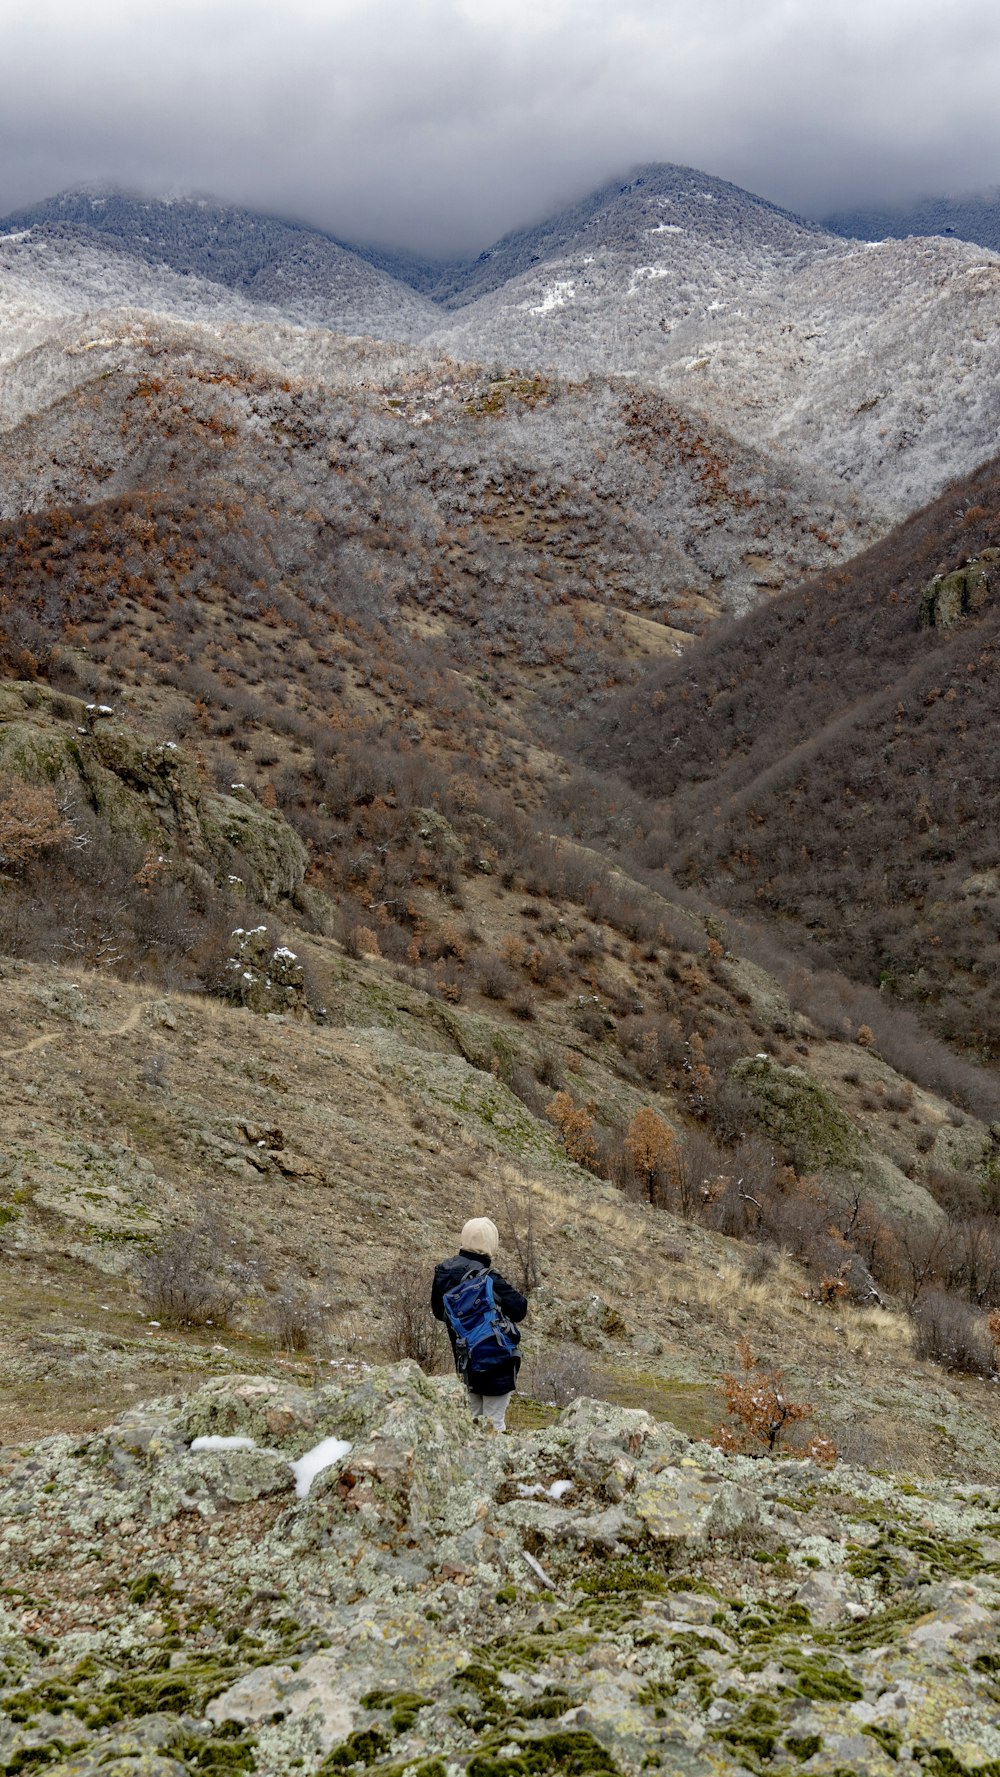 a person walking up a hill with mountains in the background